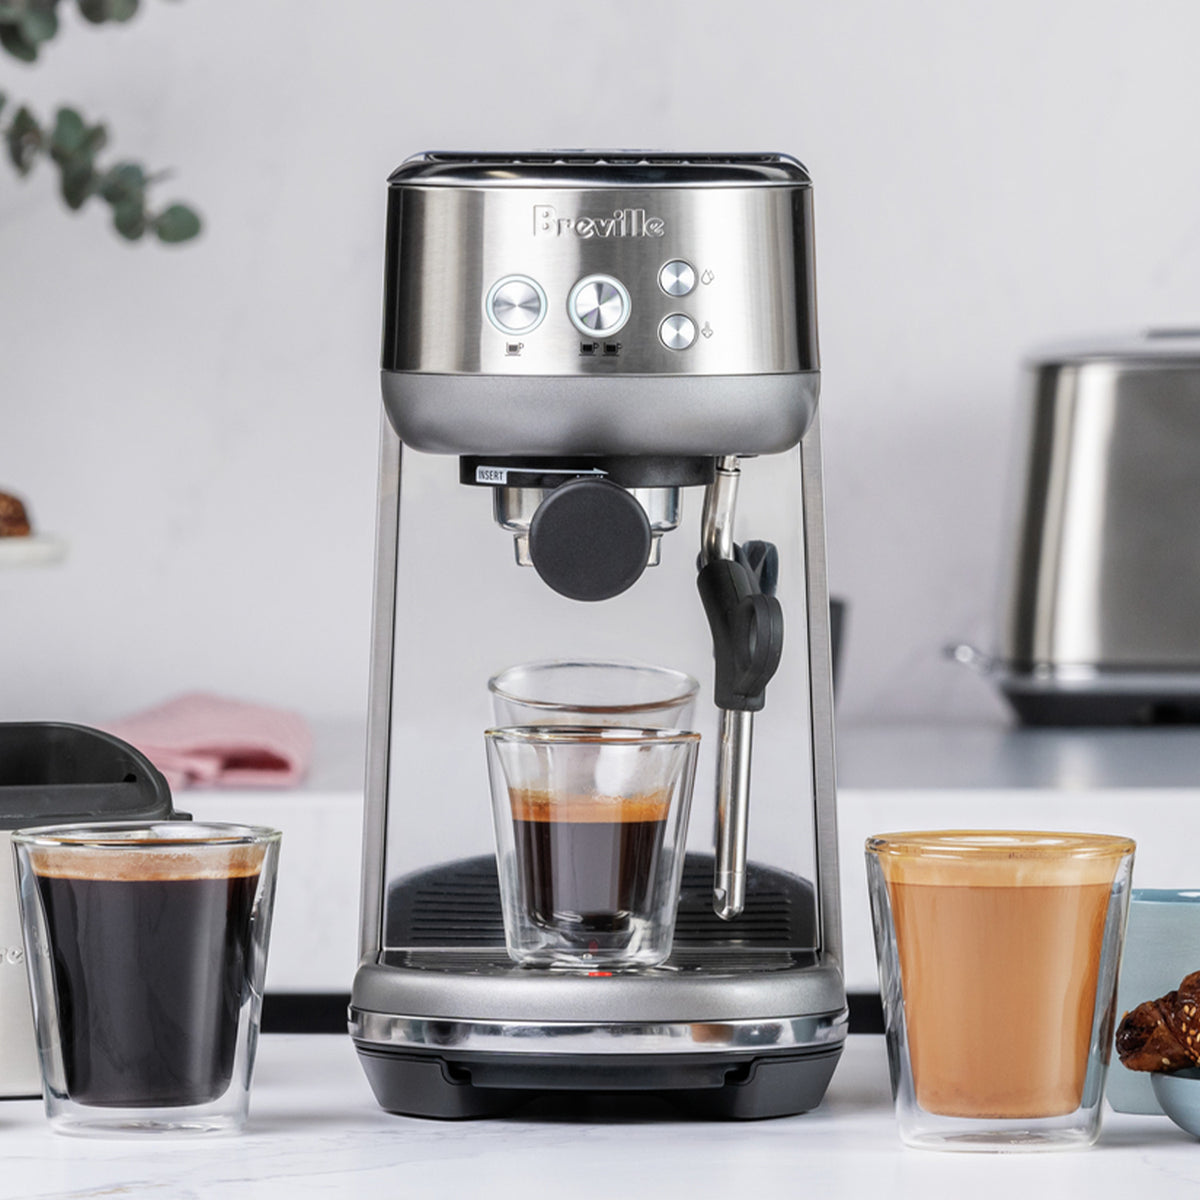 Breville Bambino Espresso Maker - BES450BSS1BUS1 for sale online